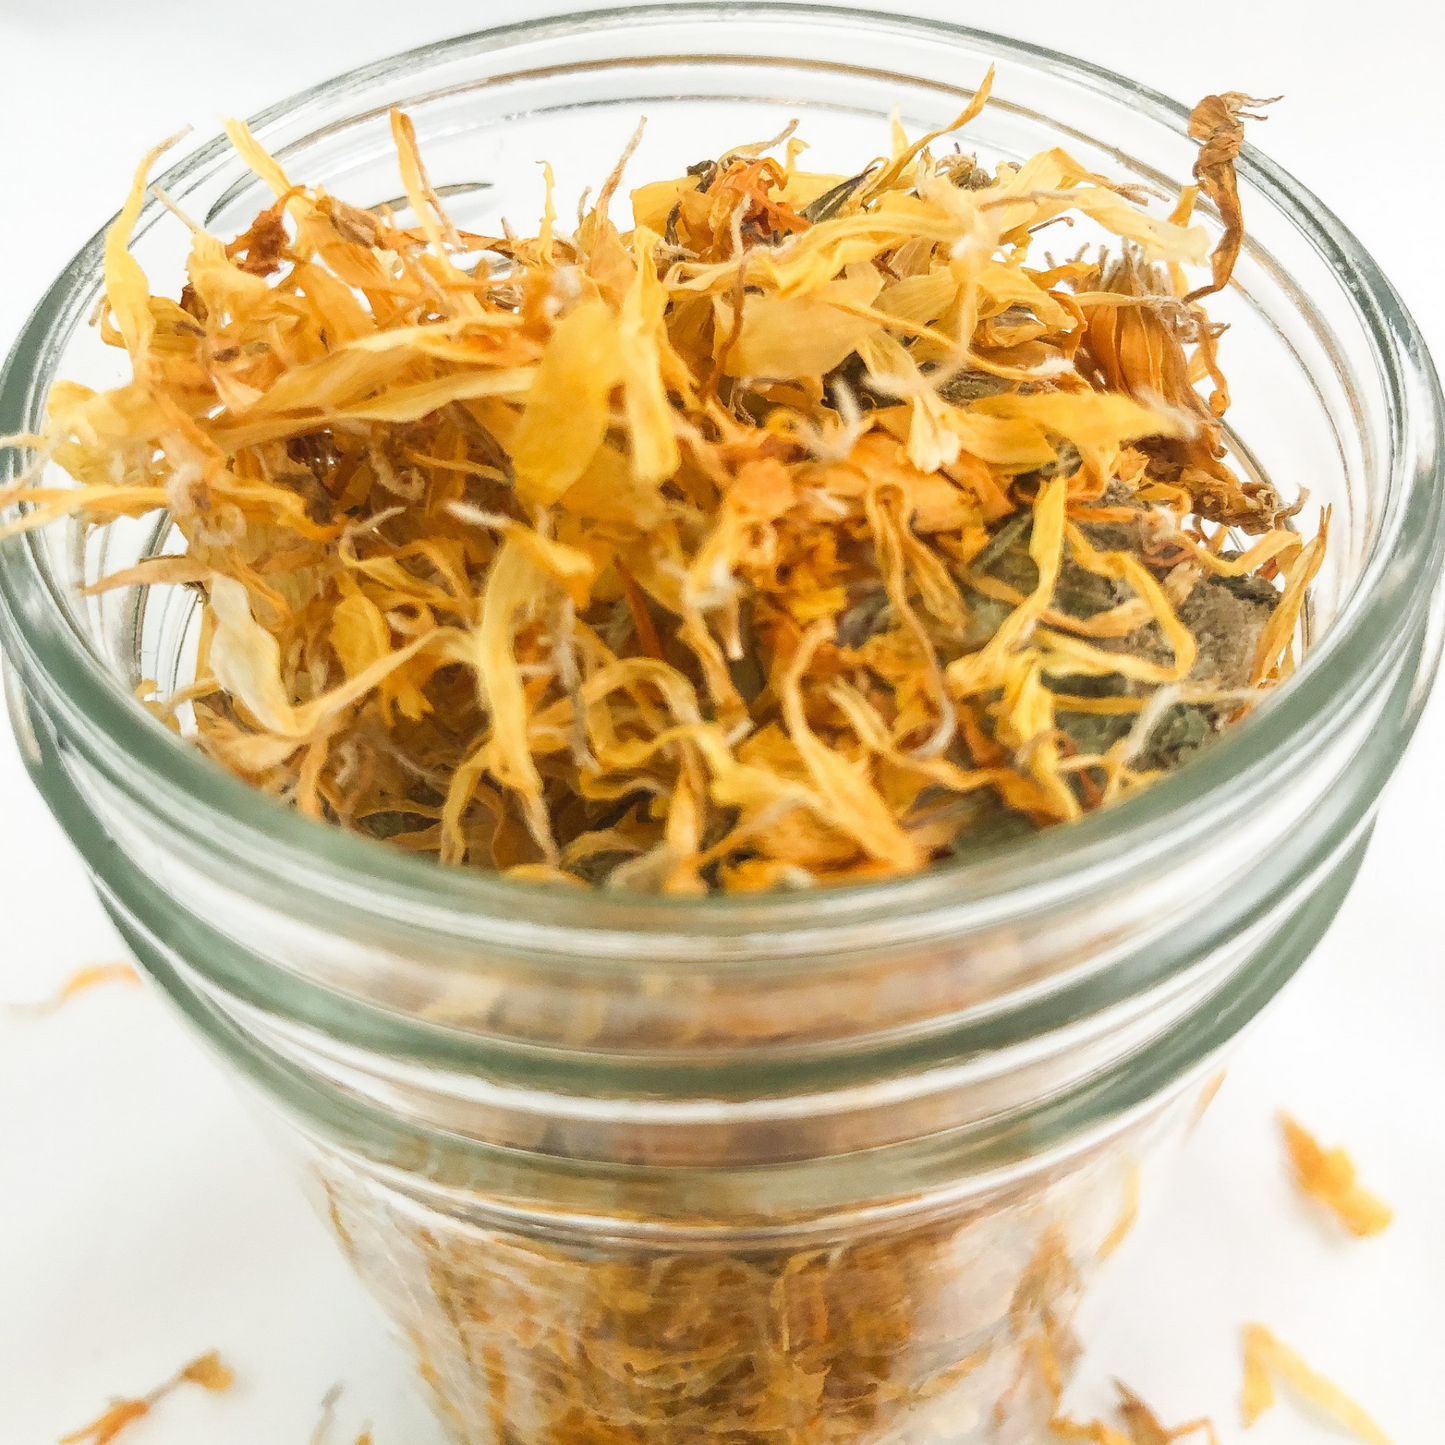 upclose image of dried calendula flowers in a clear glass jar with white background